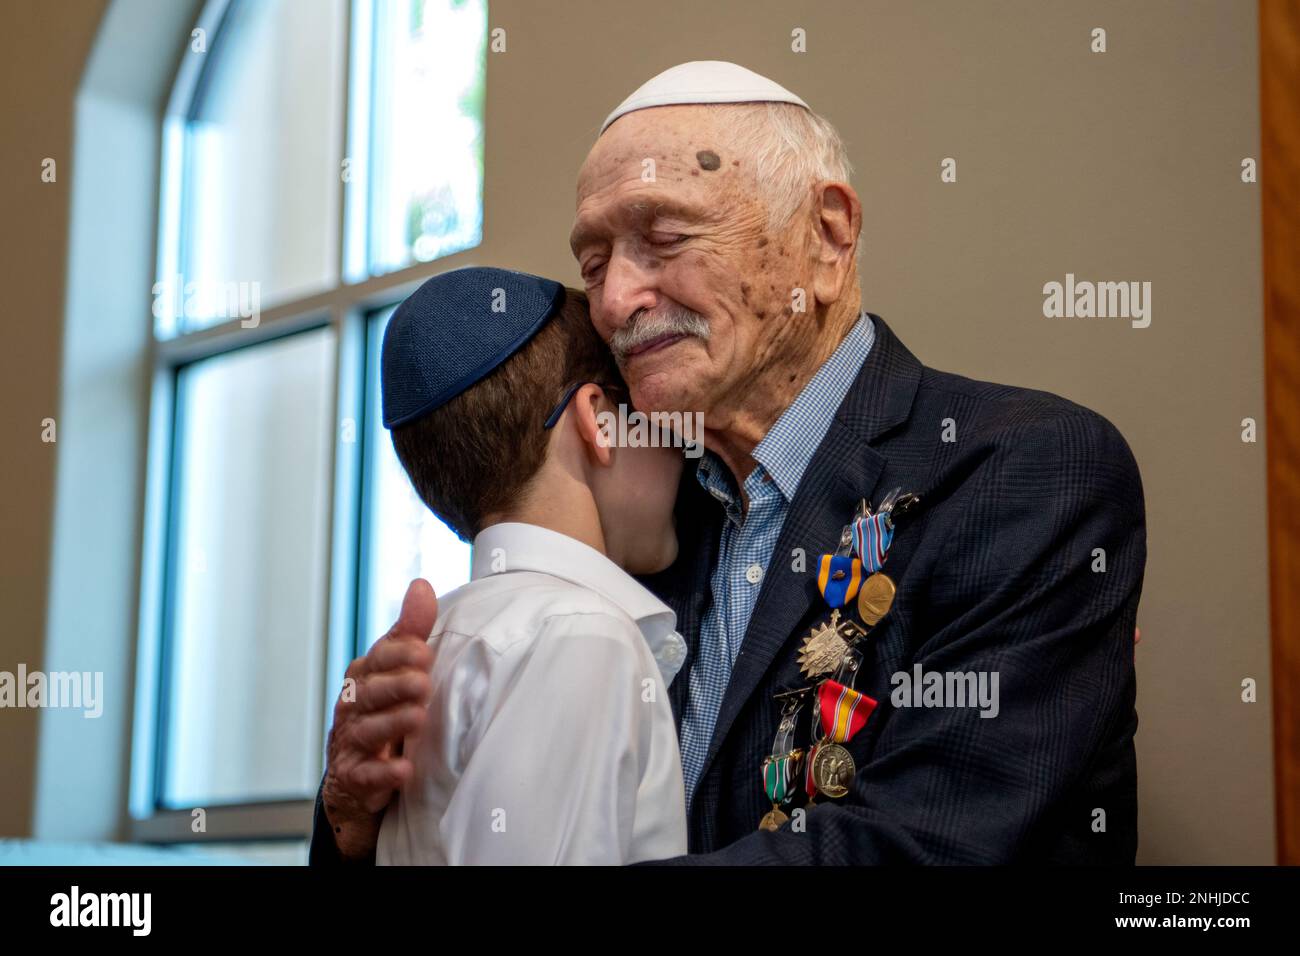 U.S. Army Air Corps 1st Lt. Gerald Teldon (right), retired, receives his ribbons from his great grandson, Menachem Mendel Teldon, for his honorable service as a pilot on July 29, 2022, at the Chabad Center for Jewish Life and Learning, San Antonio, Texas. Teldon, born in Bronx, N.Y., in 1924, joined the military in 1944. He completed 62 missions during WWII and the Korean War. Lt. Col. Andrew Stein, 502nd Operations Support Squadron commander, was the presiding officers. The awards presented to Teldon are as follows: the Air Medal; American Campaign Medal; European – African – Middle Eastern C Stock Photo